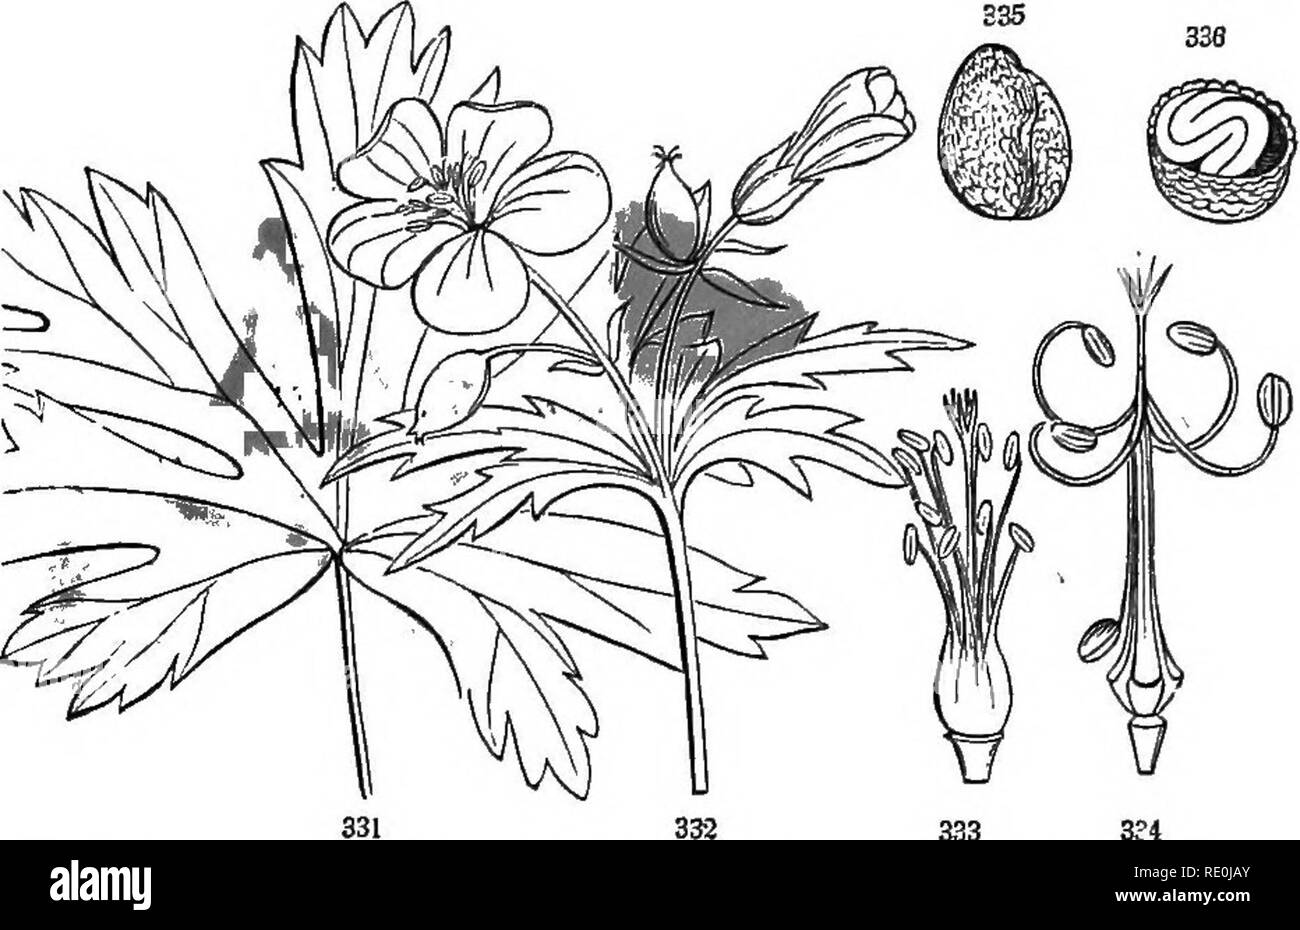 . Botany for young people and common schools : how plants grow : a simple introduction to structural botany : with a popular flora, or, an arrangement and description of common plants, both wild and cultivated . Botany; Botany. POPULAR FLORA. 135 1. Common Flax. Root annual; leaves lance-shaped; flower blue. Cultivated. L. vsitatissimum. 2, Virginia Flax. Root perennial; leaves oblong or lance-shaped; flowers very small, yellow. Dry l^rginianuvu woods. L. 22. WOOD-SOKBEL PAMILT. Order OXALIDACE^. *^, ^O/Z^U Small herbs with sour juice, compound leaves of three leaflets, and flowers nearly as i Stock Photo